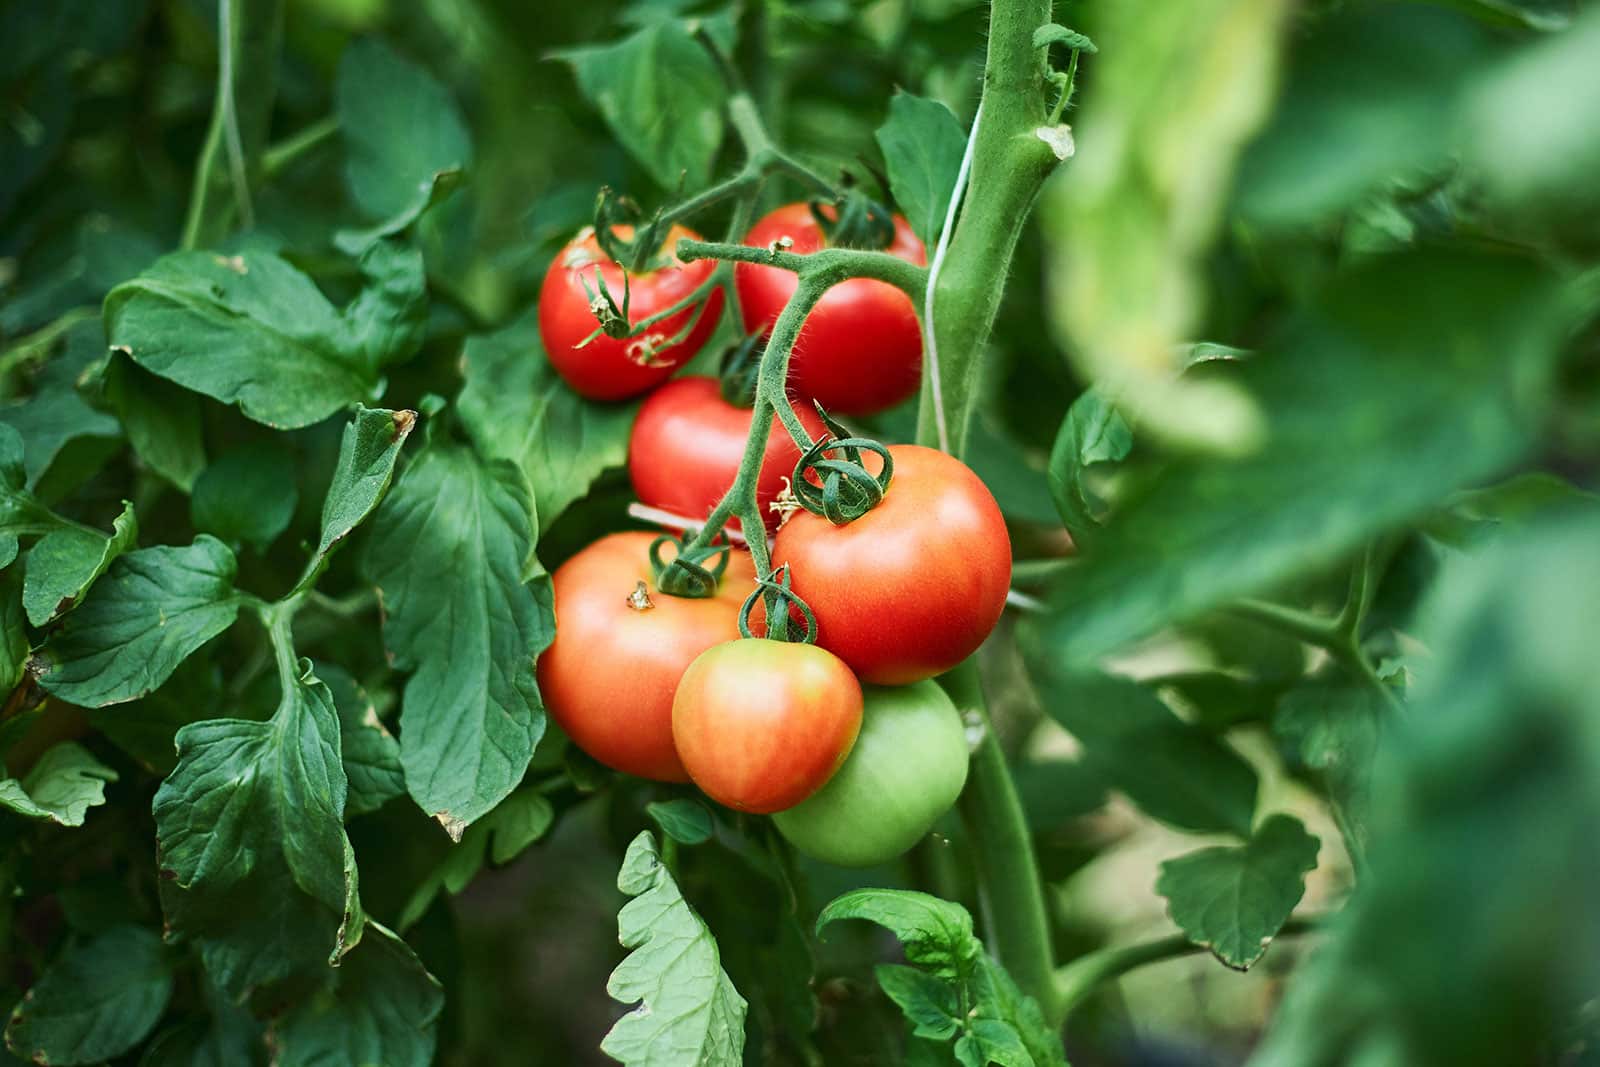 Cluster of ripe red tomatoes growing on tomato vines